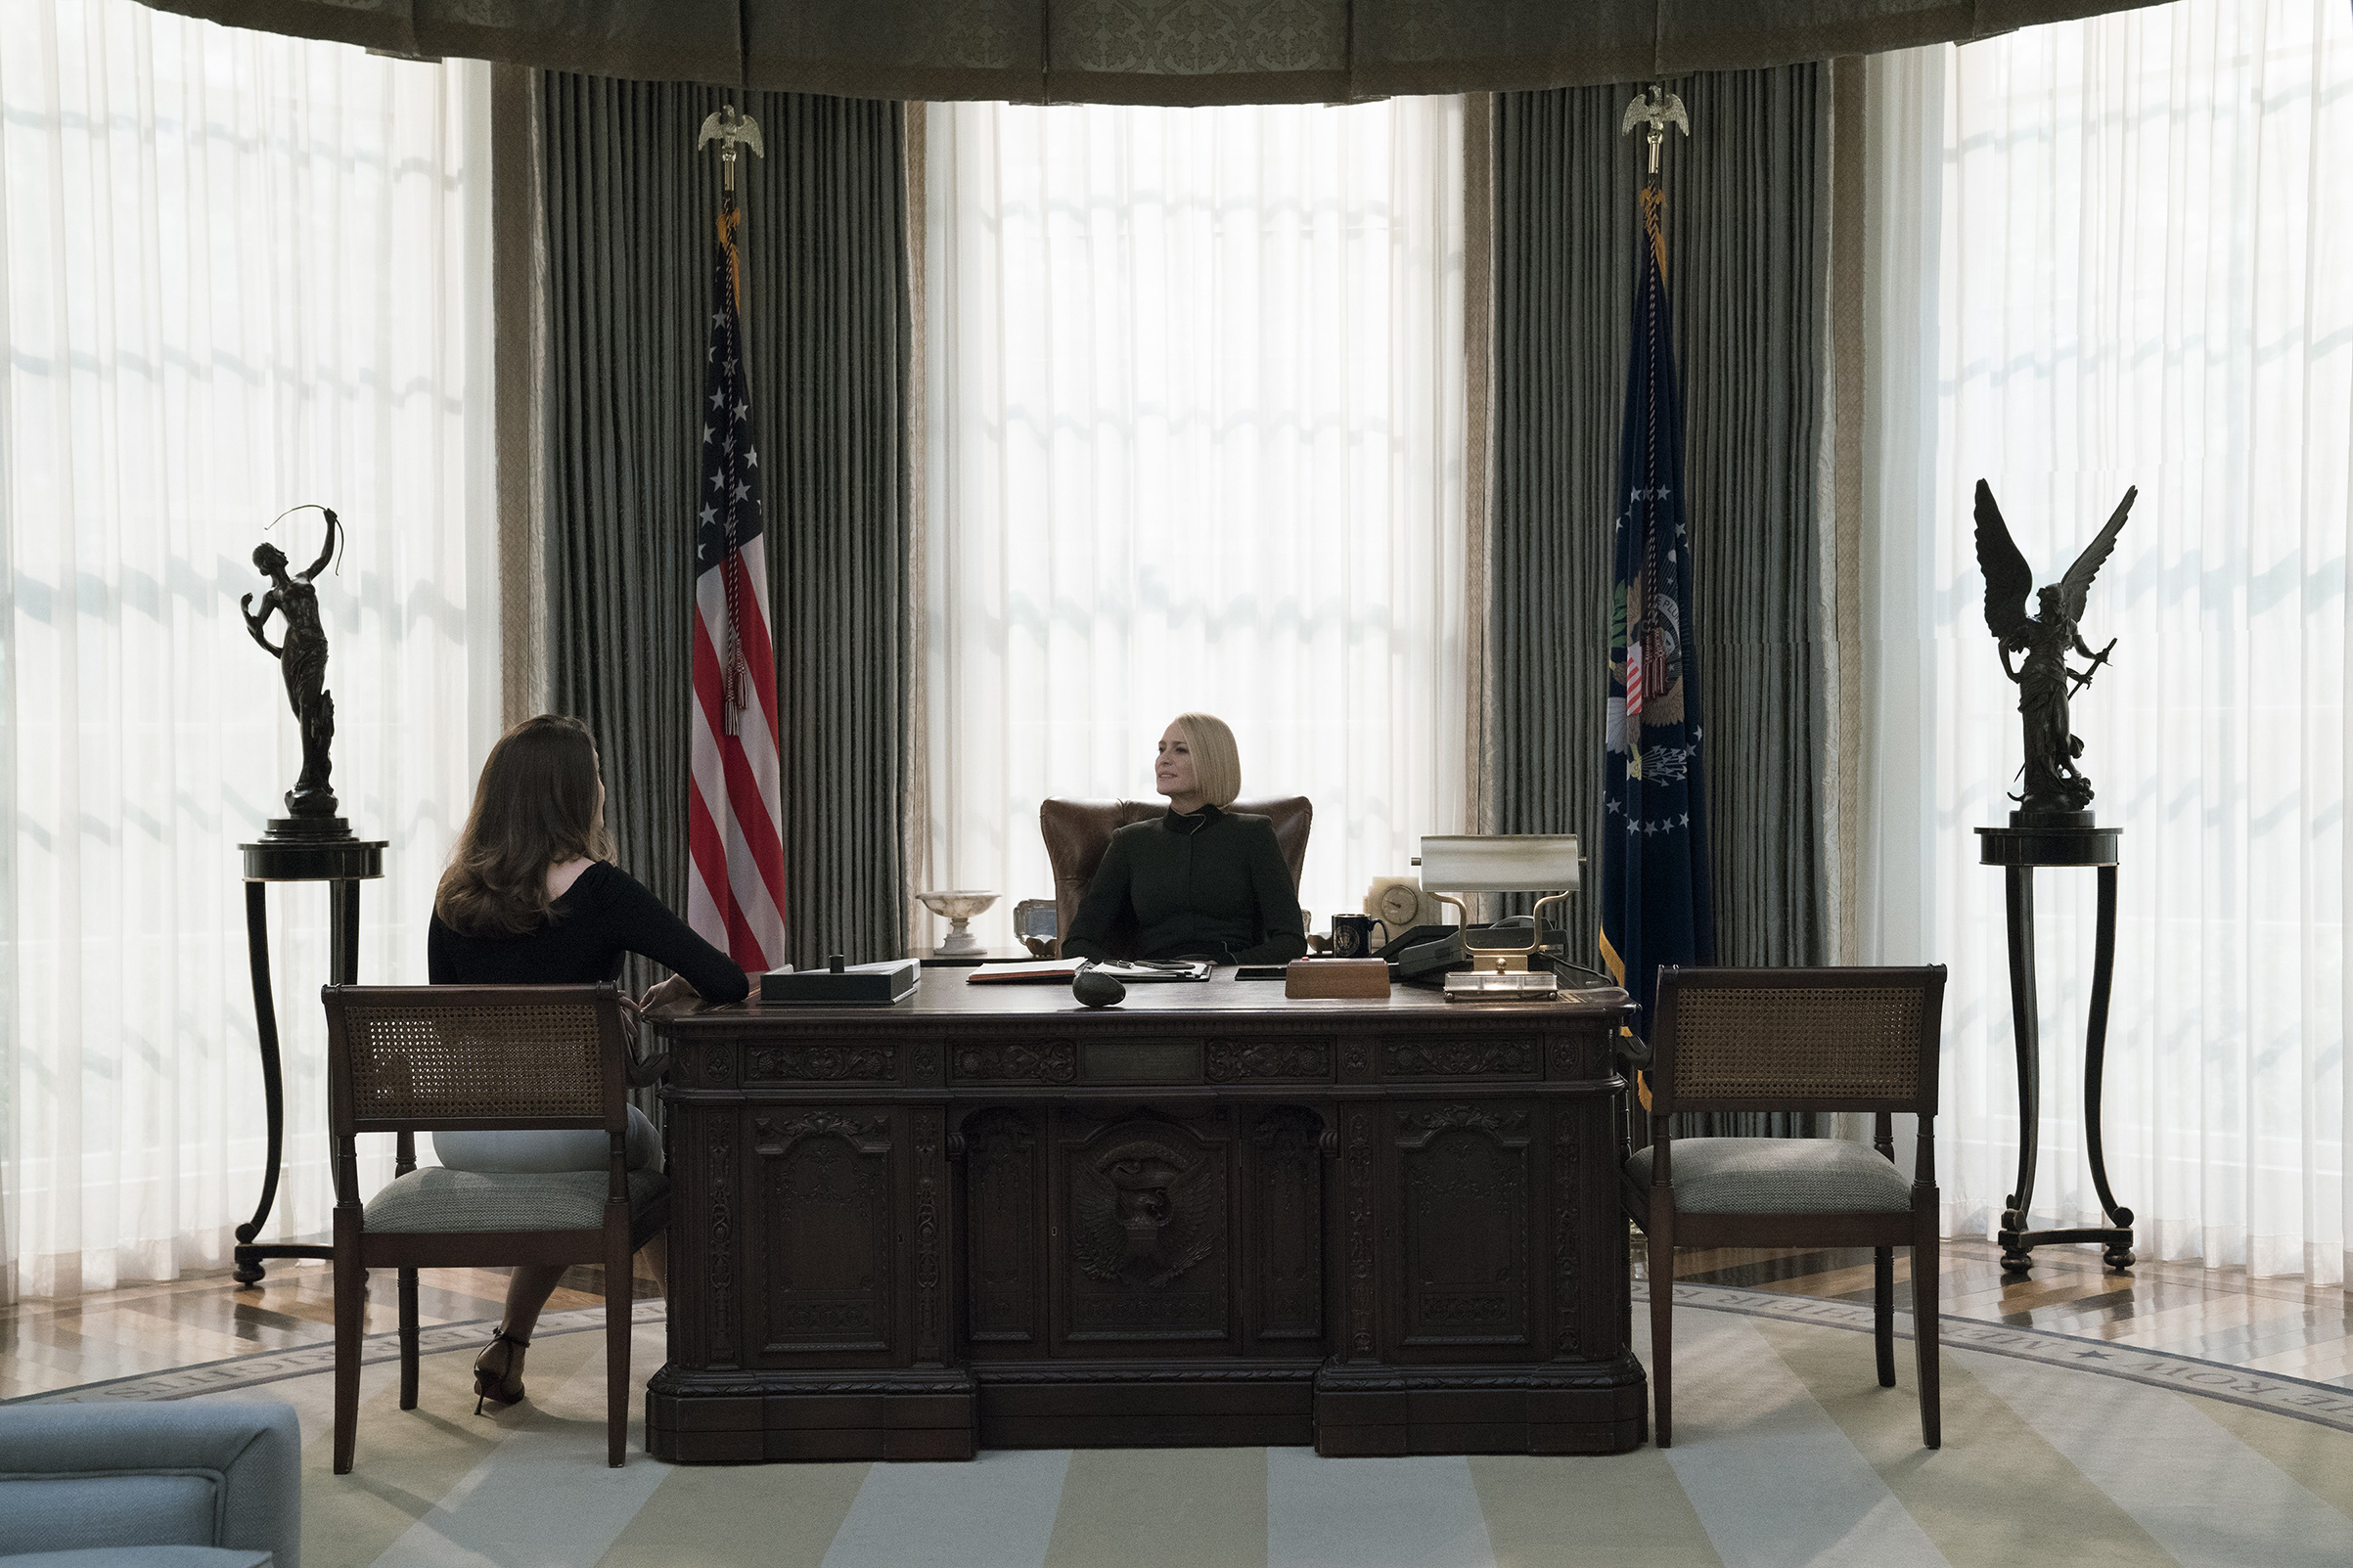 Robin Wright’s Claire Underwood assumes the presidency on House of Cards but still has to live in her husband’s shadow (Netflix)